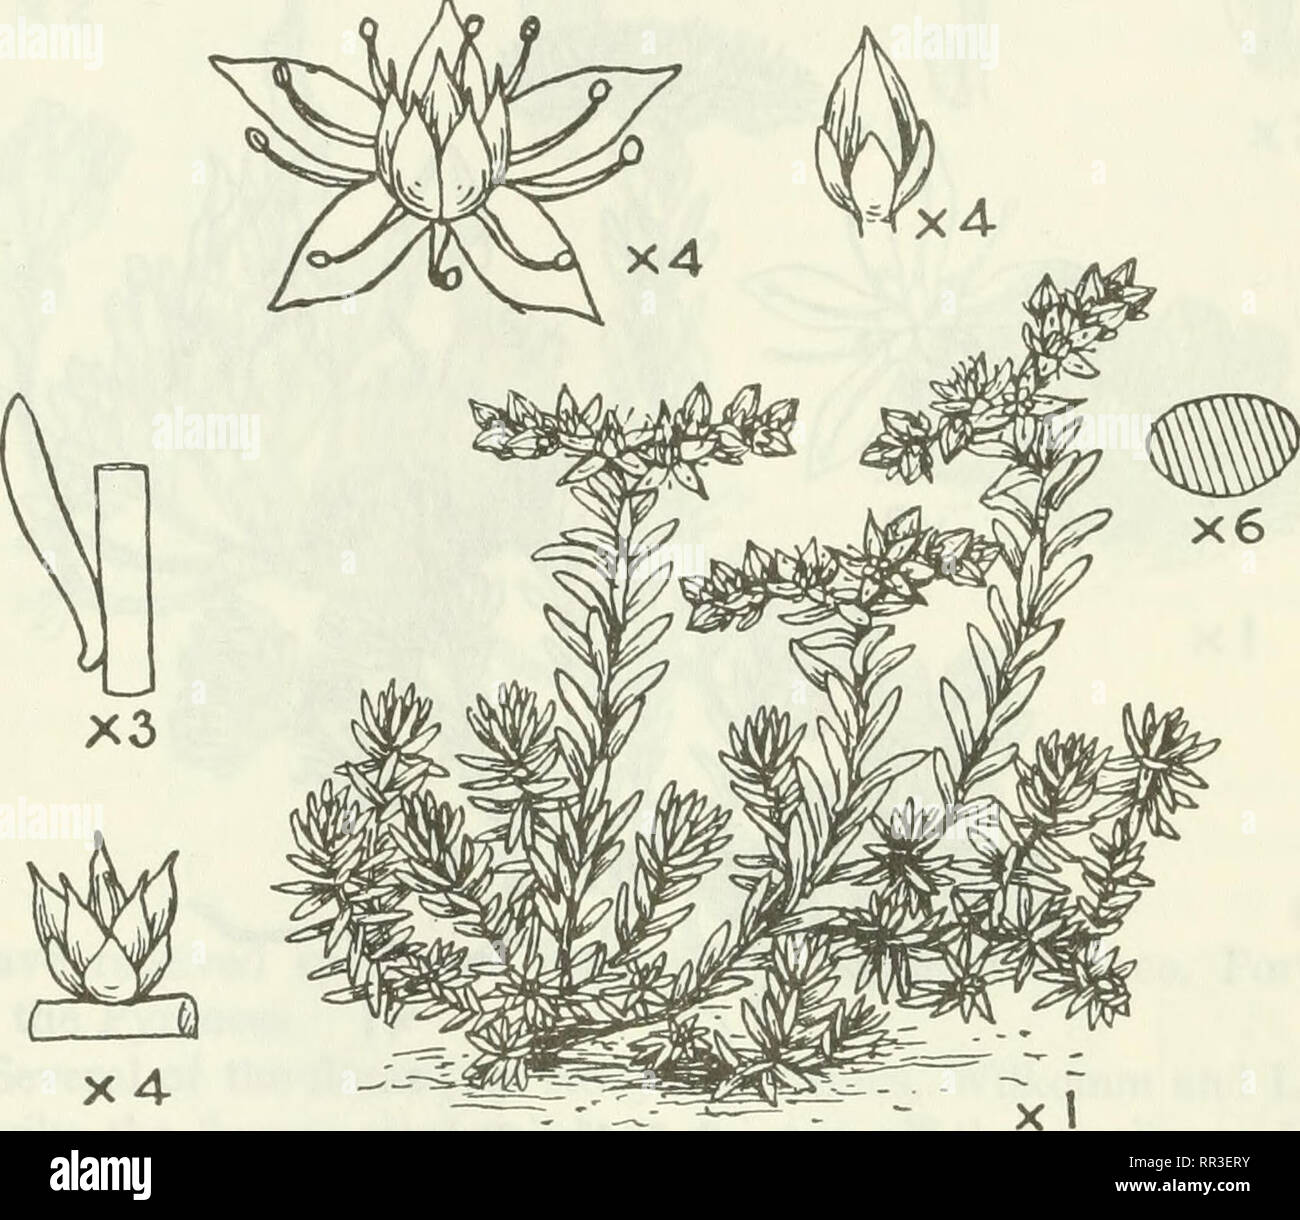 . An account of the genus Sedum as found in cultivation. Sedum; Crassulaceae. 190 JOURNAL OF THE ROYAL HORTICULTURAL SOCIETY. 83. Sedum gracile C. A. Meyer (fig. 107). •5. gracile CAMeyer, &quot; Enum. Plant. Cauc,&quot; 151,1831. Bossier, &quot;Flora Orientalis,&quot; 2, 781. Hamet in Trd. BoL Sada (Tiflis), 8, pt. iii. 25. A small linear-leaved plant, having, when not in flower, some re- semblance to S. sexangulare, but smaller and more tufted, not creeping. The flowers are white, not yellow as in sexangulare. Closely allied to S. Alberii, and ahnost identical ia flower, but Alberli has a cr Stock Photo